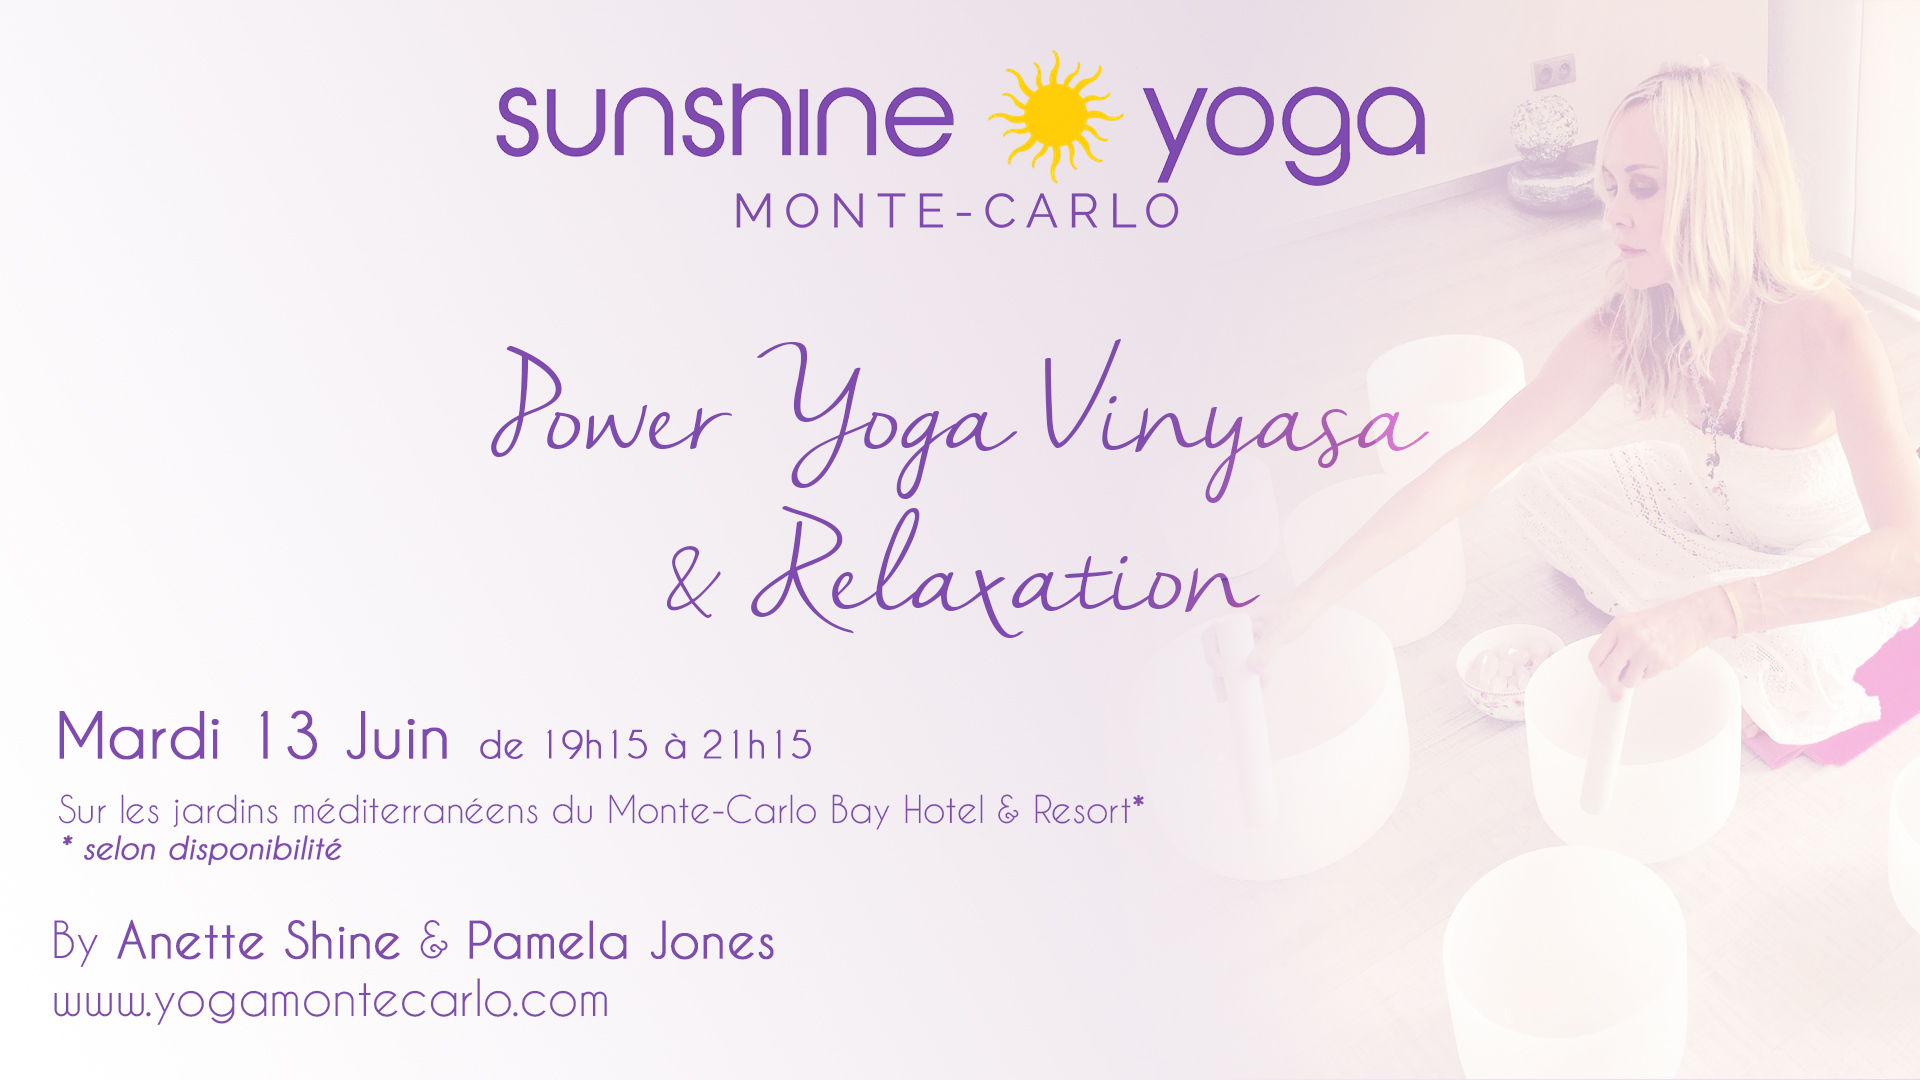 You are currently viewing Power Yoga Vinyasa & Relaxation on June 13th with Anette Shine & Pamela Jones